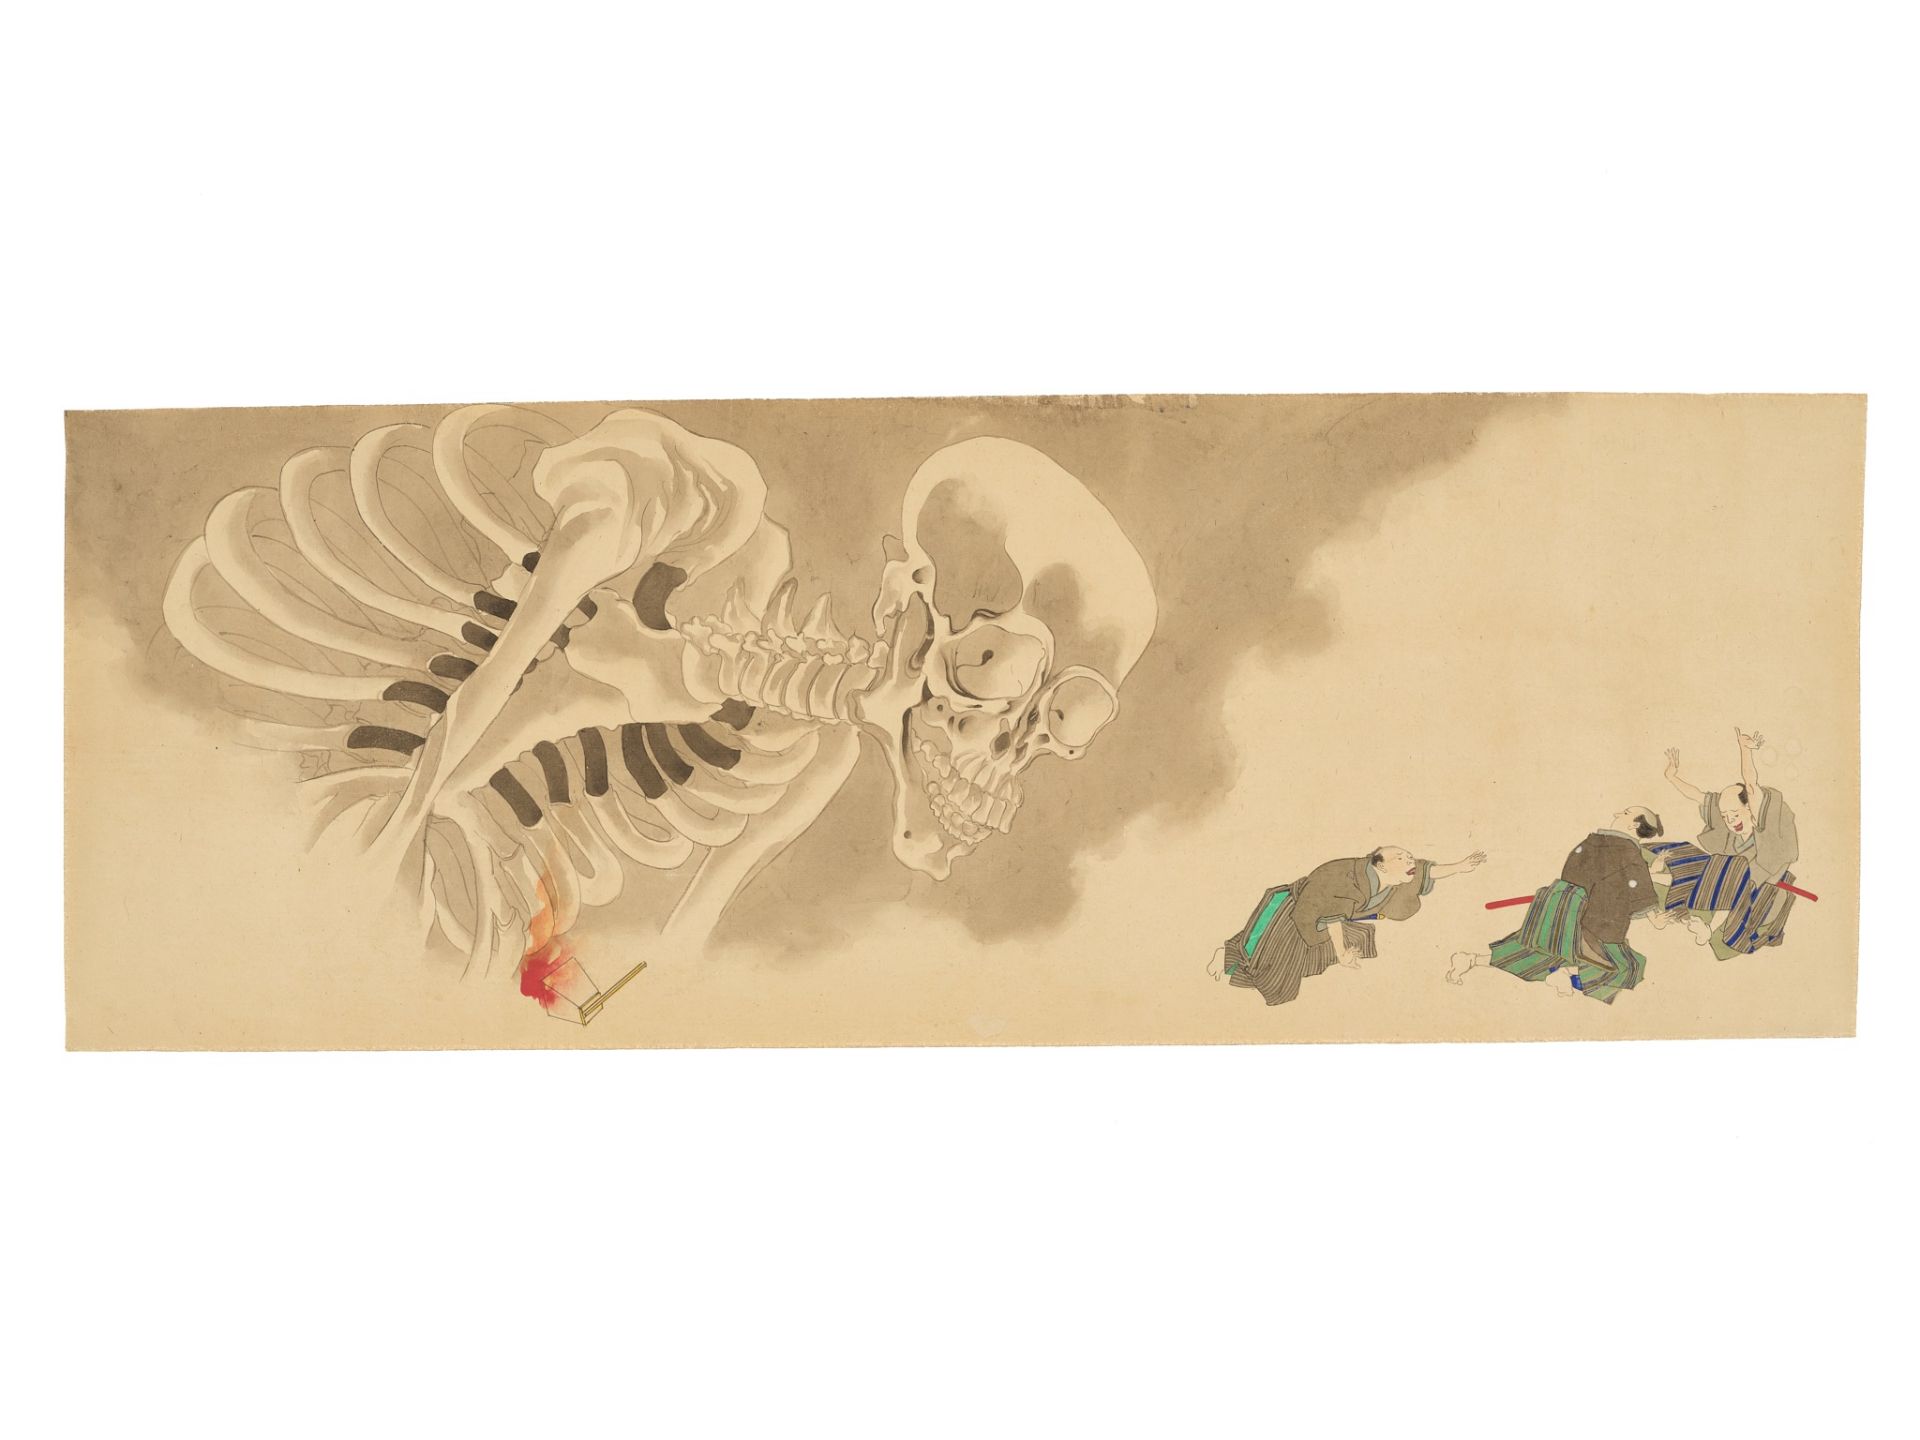 A LARGE AND RARE EMAKI HANDSCROLL WITH FOUR SEPARATE LEAVES, ONE WITH A DEPICTION OF GASHADOKURO